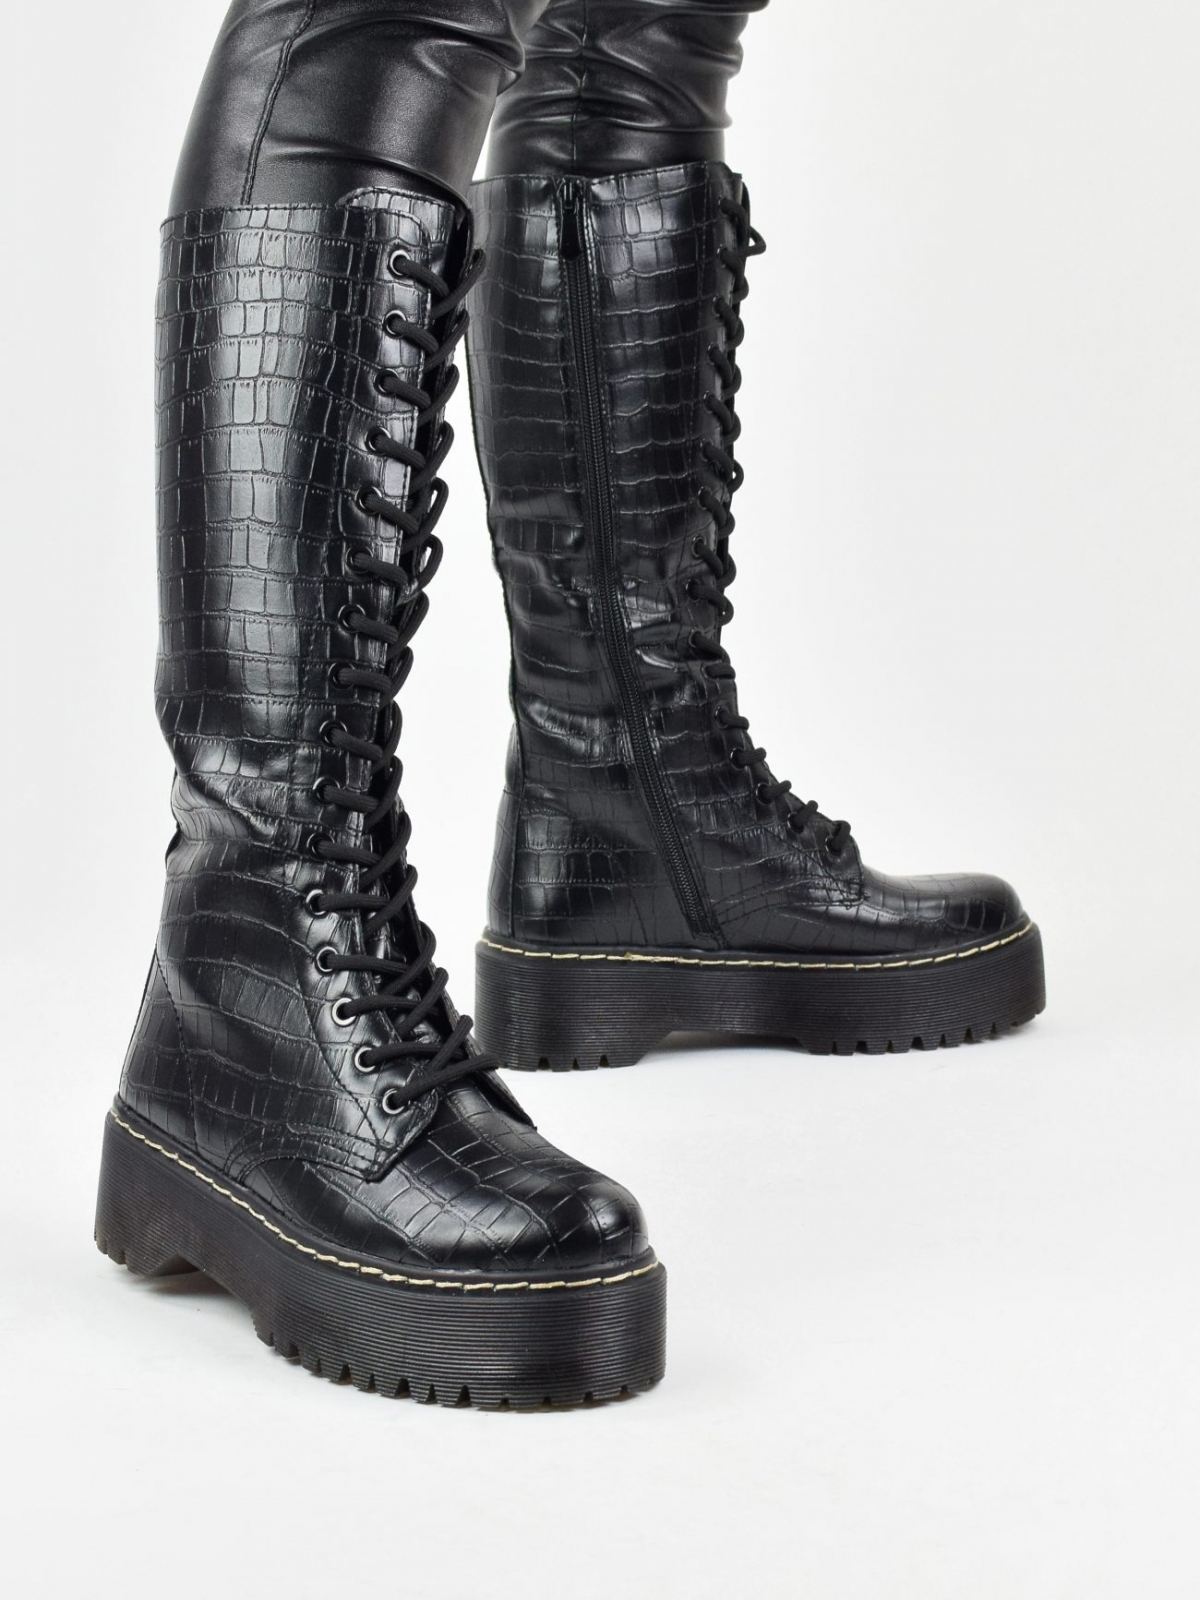 Modern design high boots with animal skin pattern in black